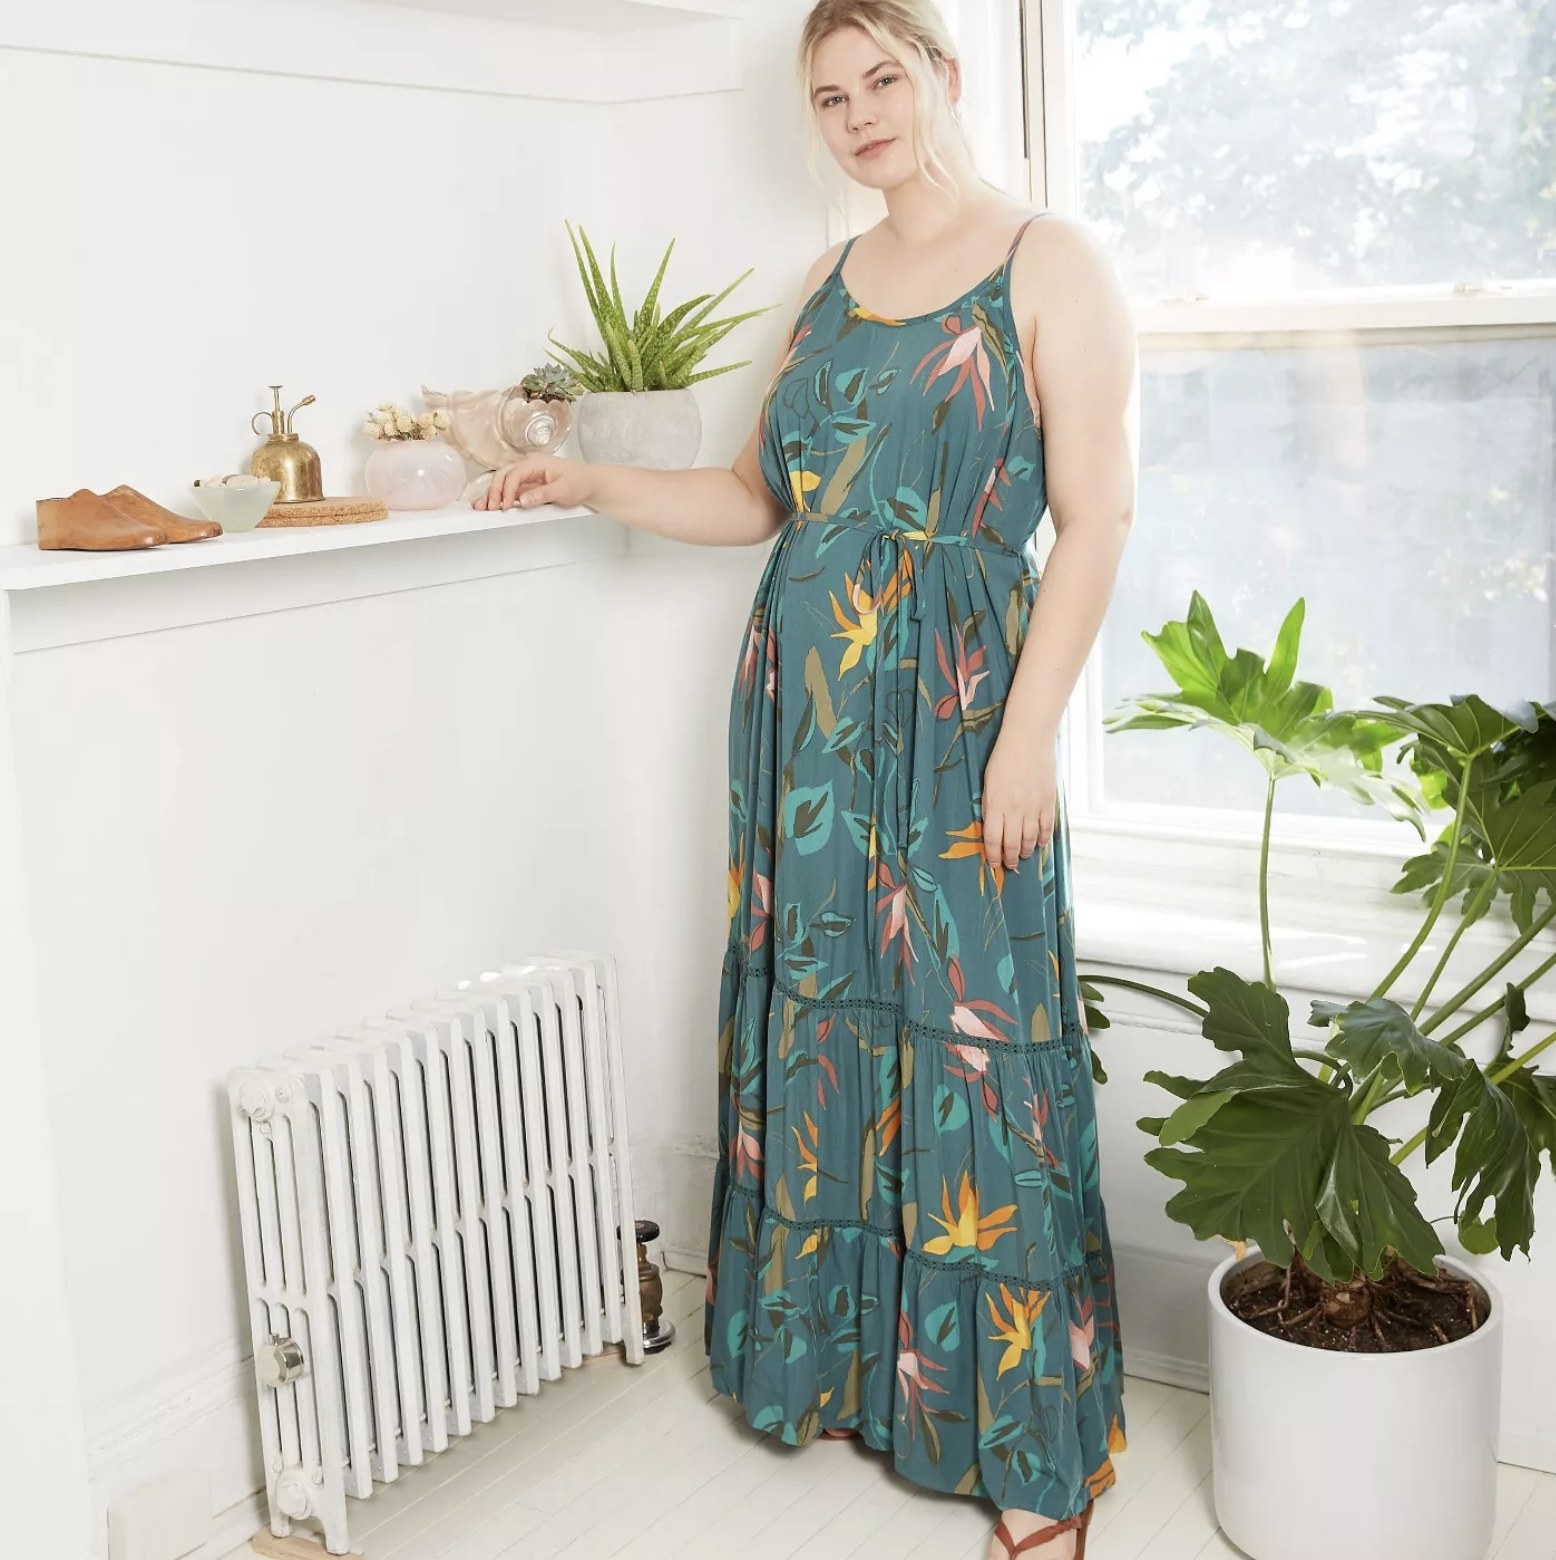 Model is wearing a blue/green maxi dress with thin shoulder straps and a floral pattern